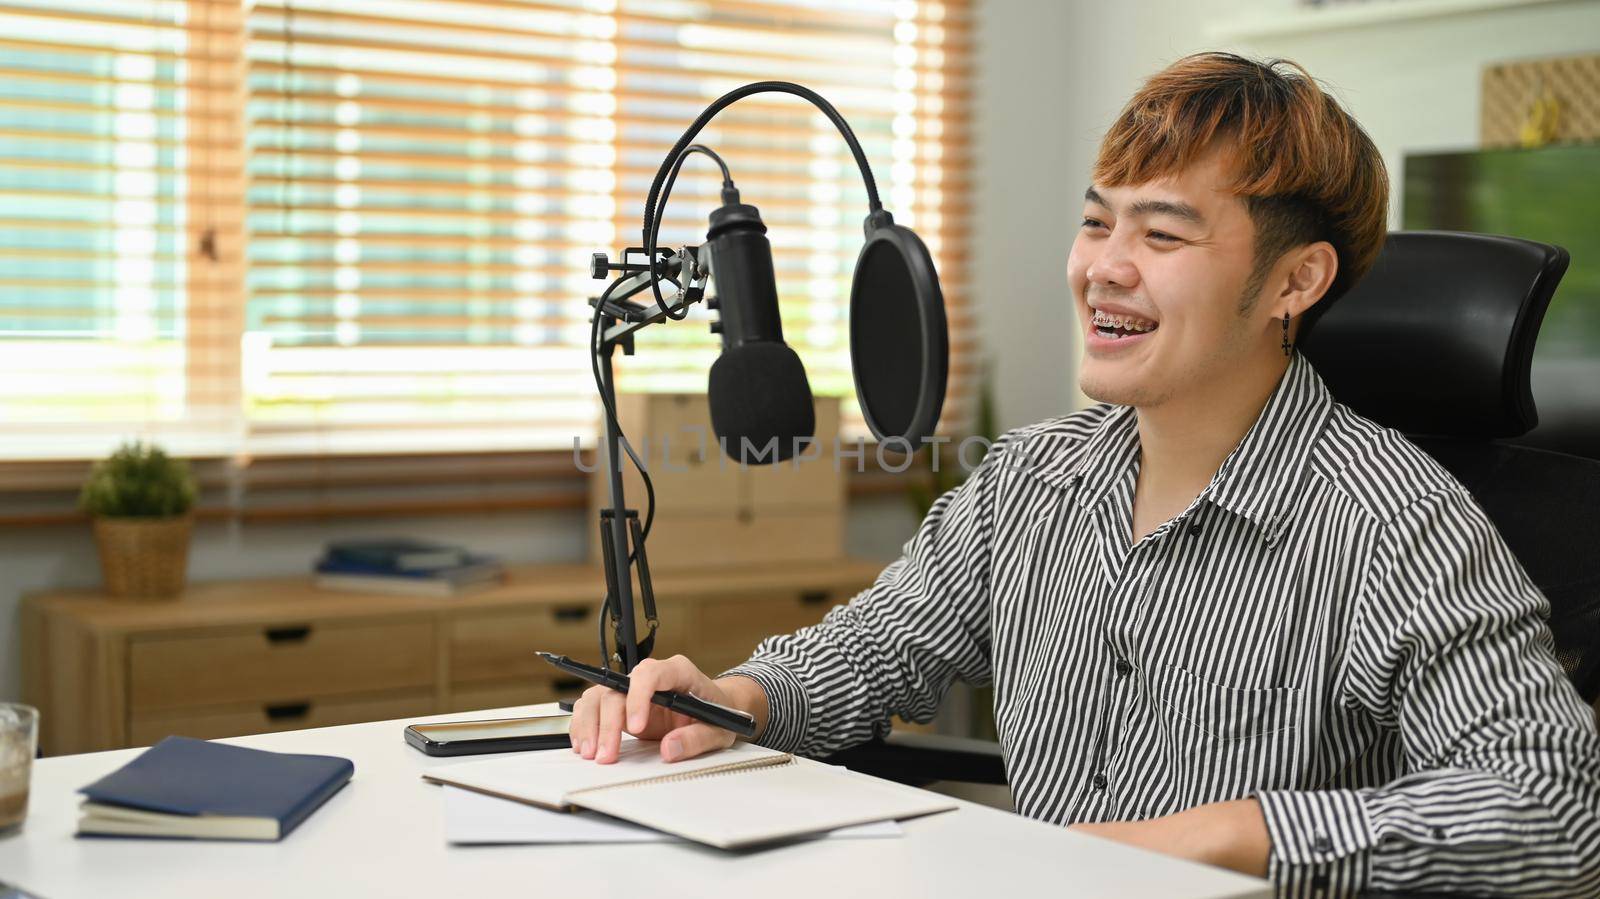 Cheerful Asian man using microphone while streaming audio podcast at home studio. Entertainment, podcasts and technology concept.